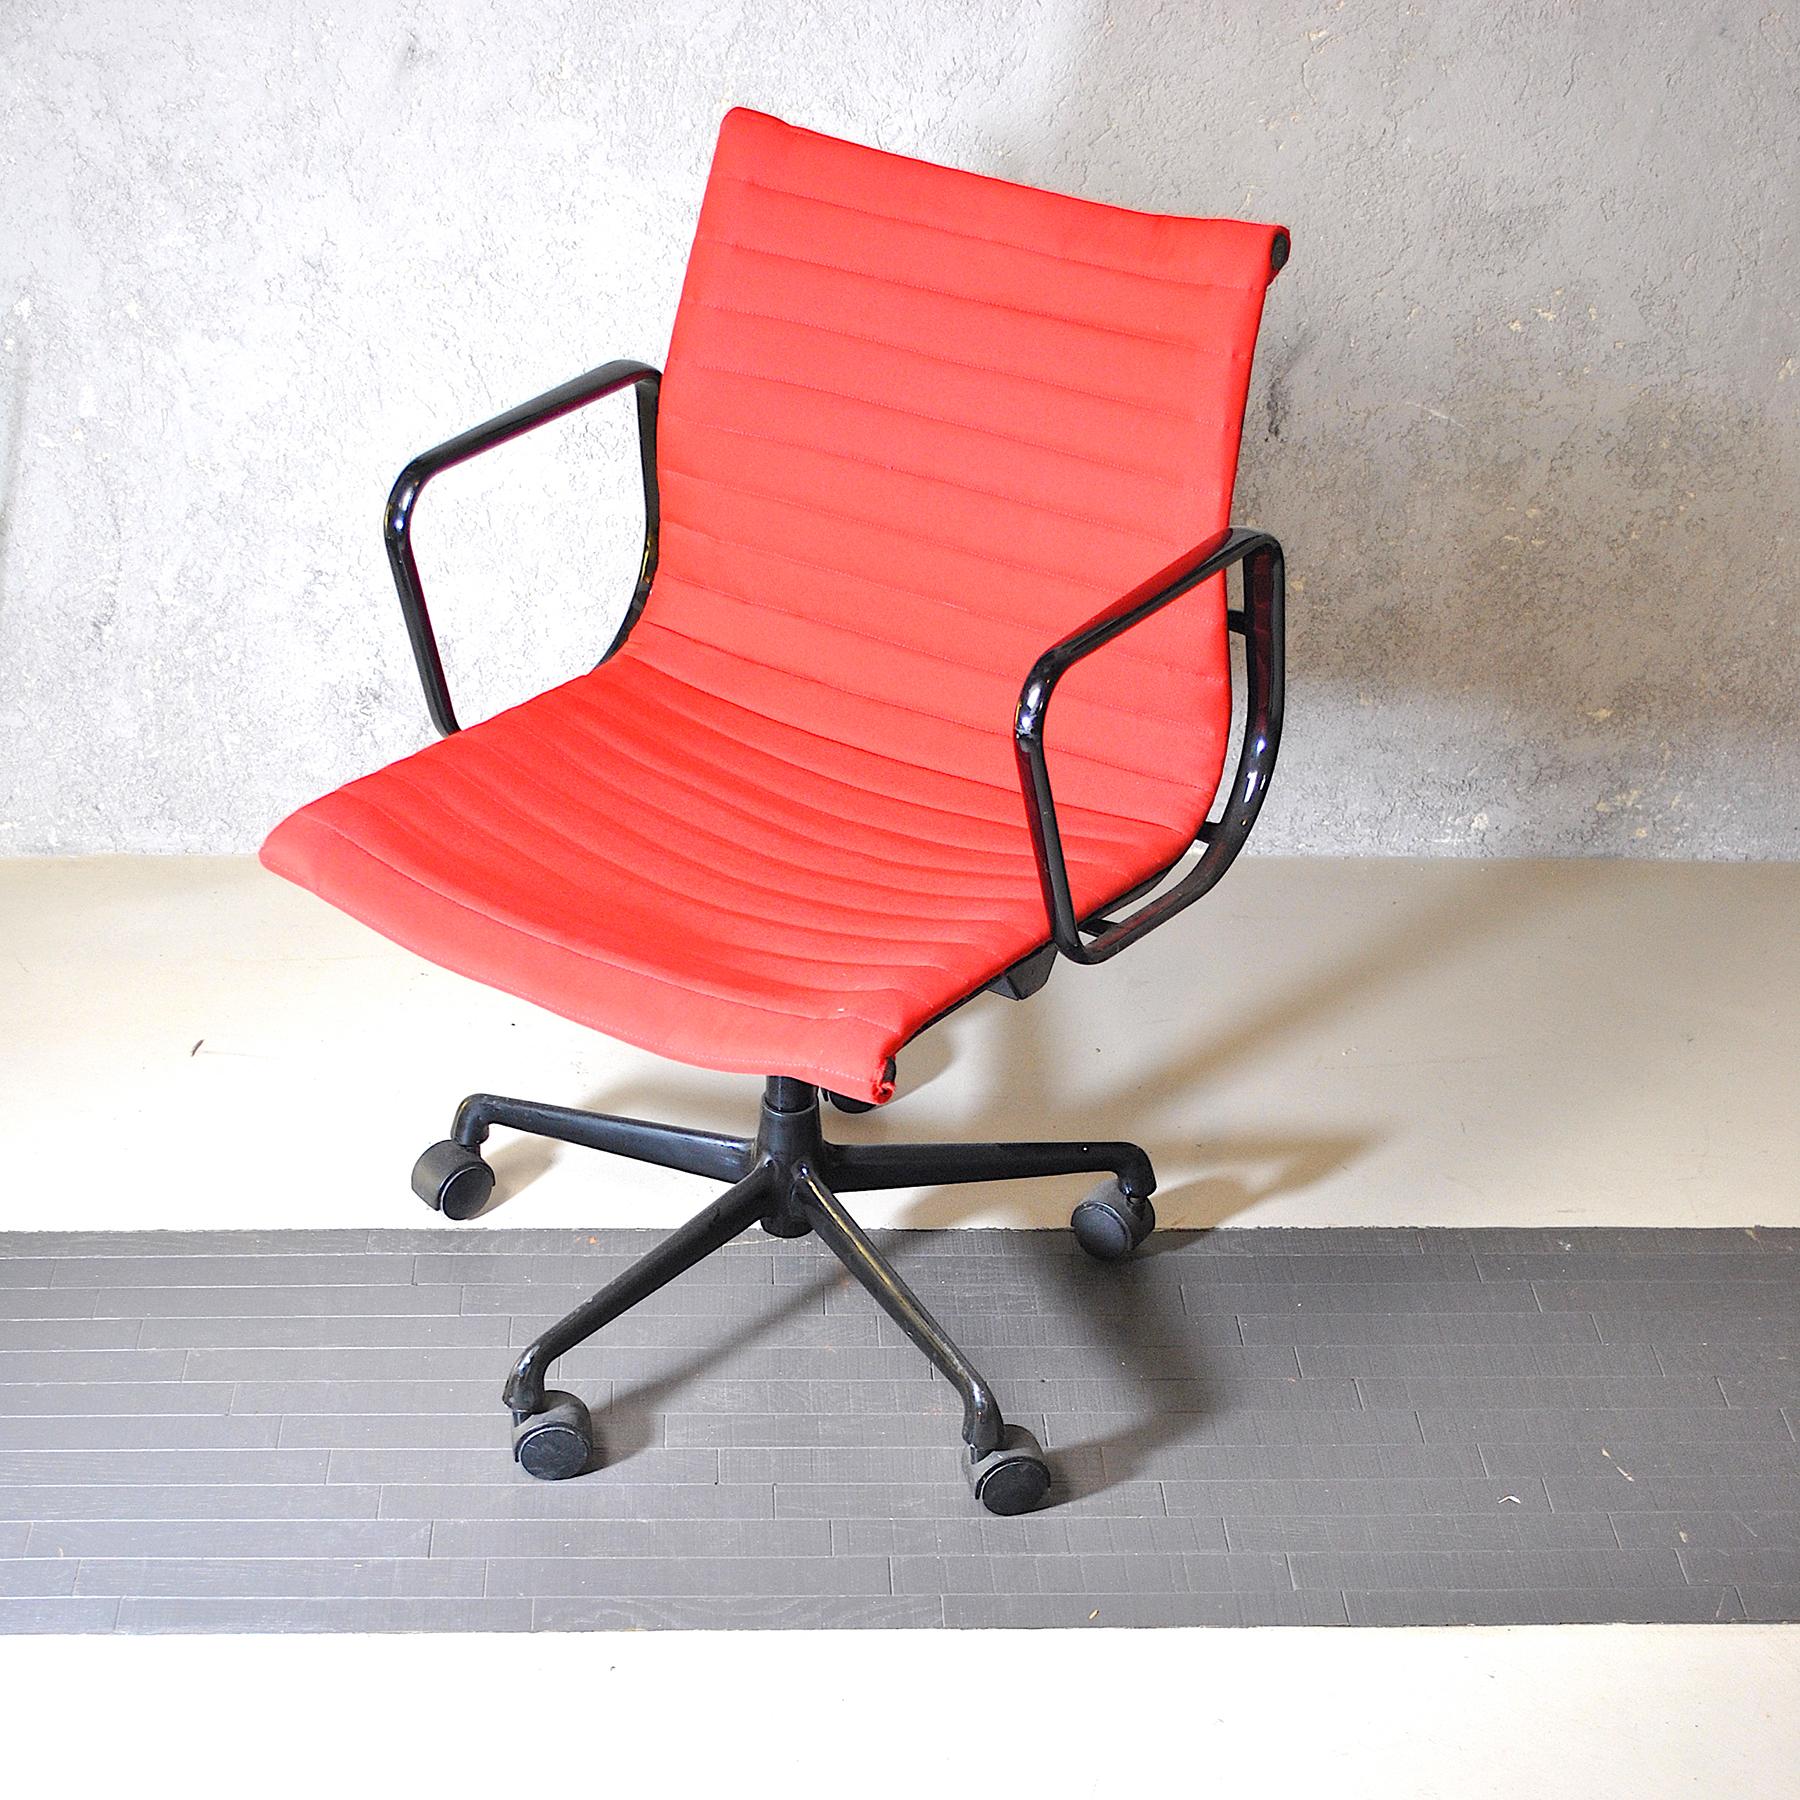 red computer chair